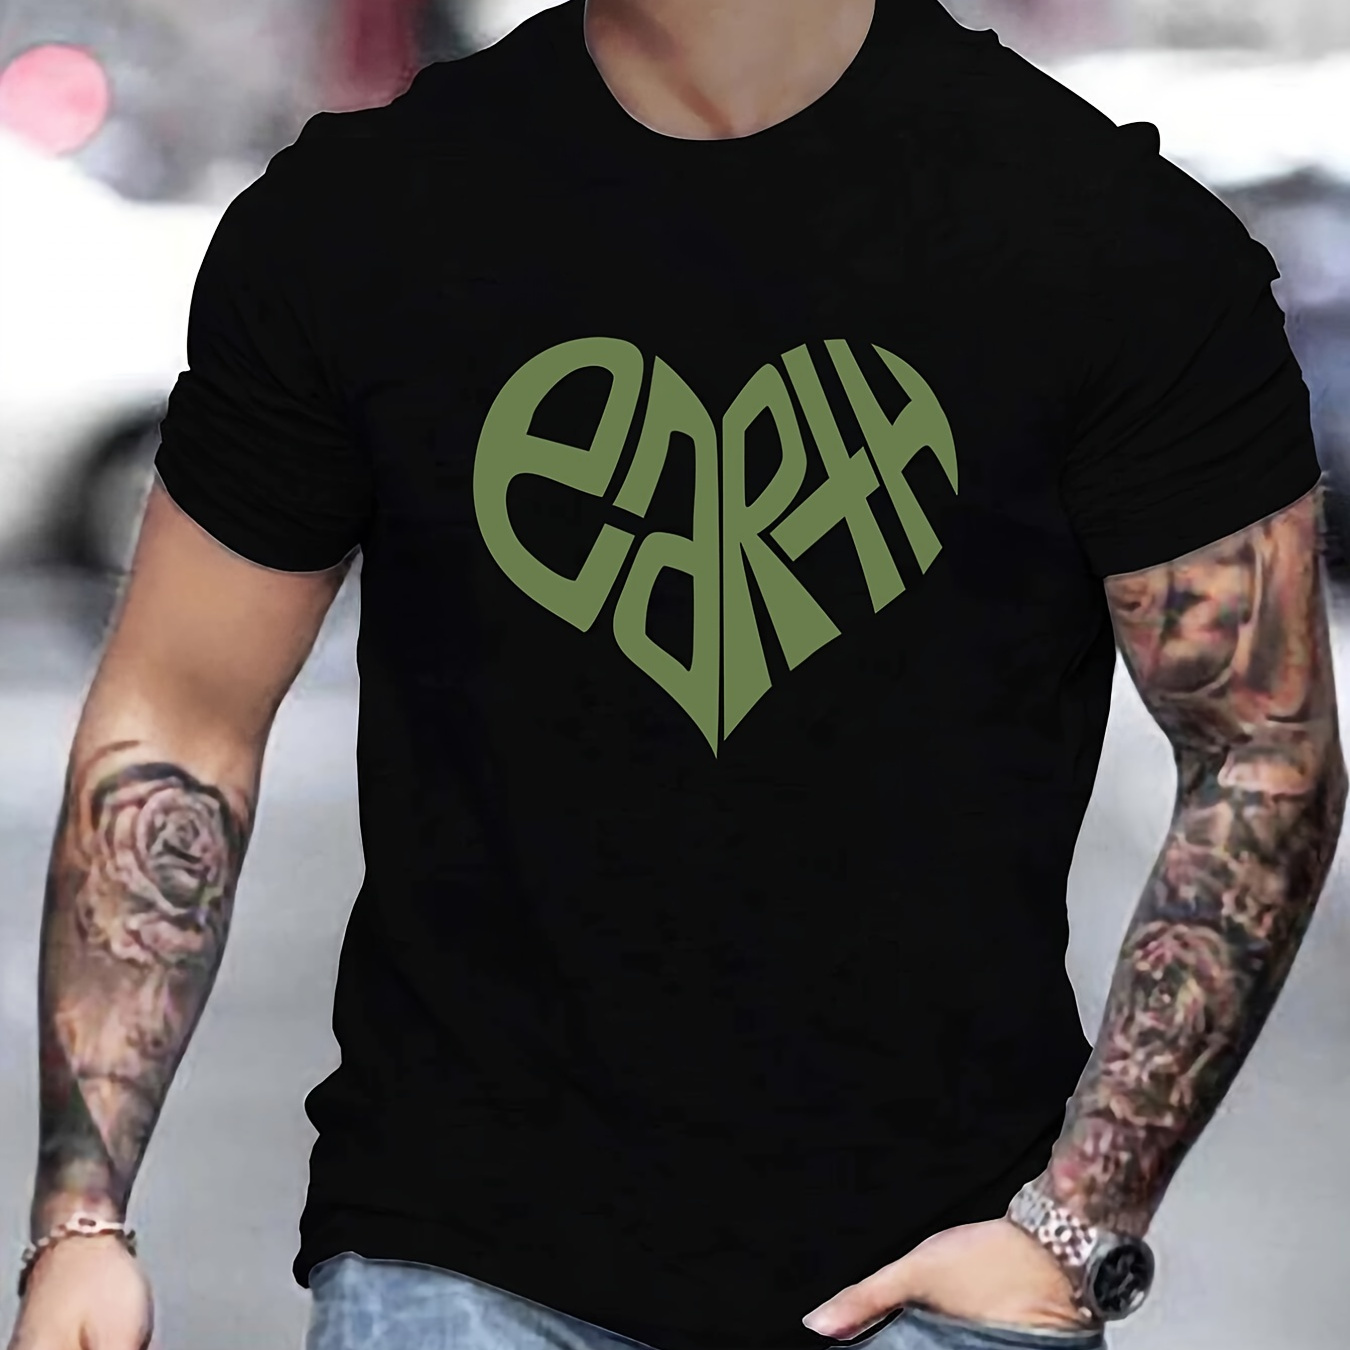 

Men's Casual Sports Loose T-shirts "earth" Heart Graphic Round Neck Short Sleeve Tees Top Summer Clothes